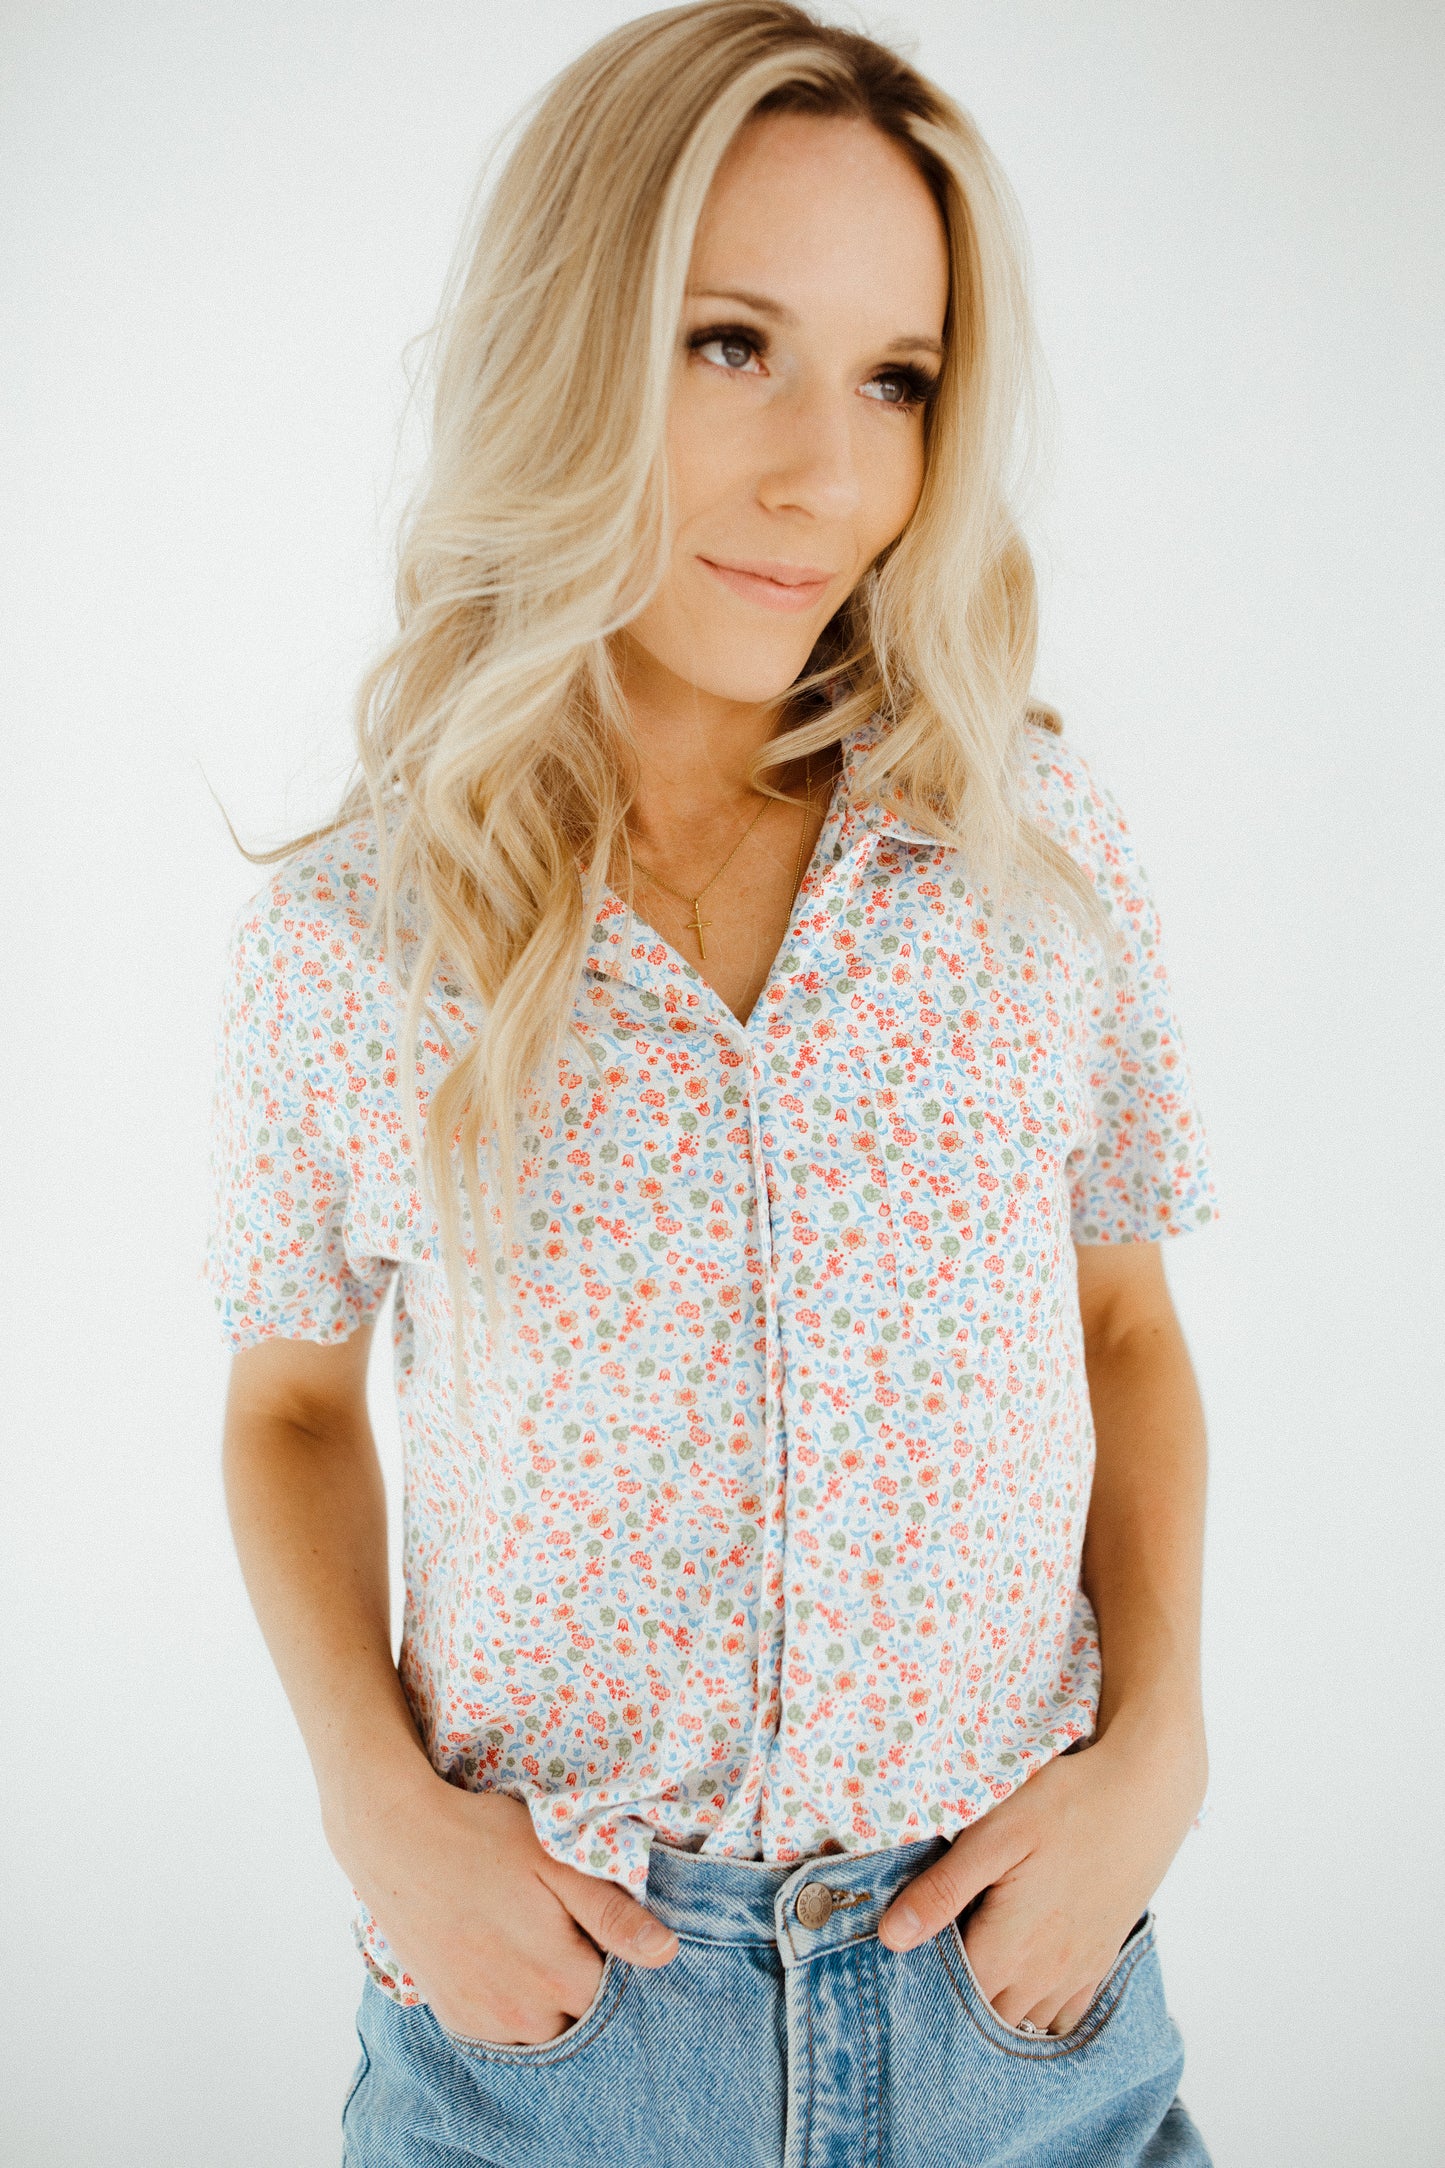 The Summer Blouse